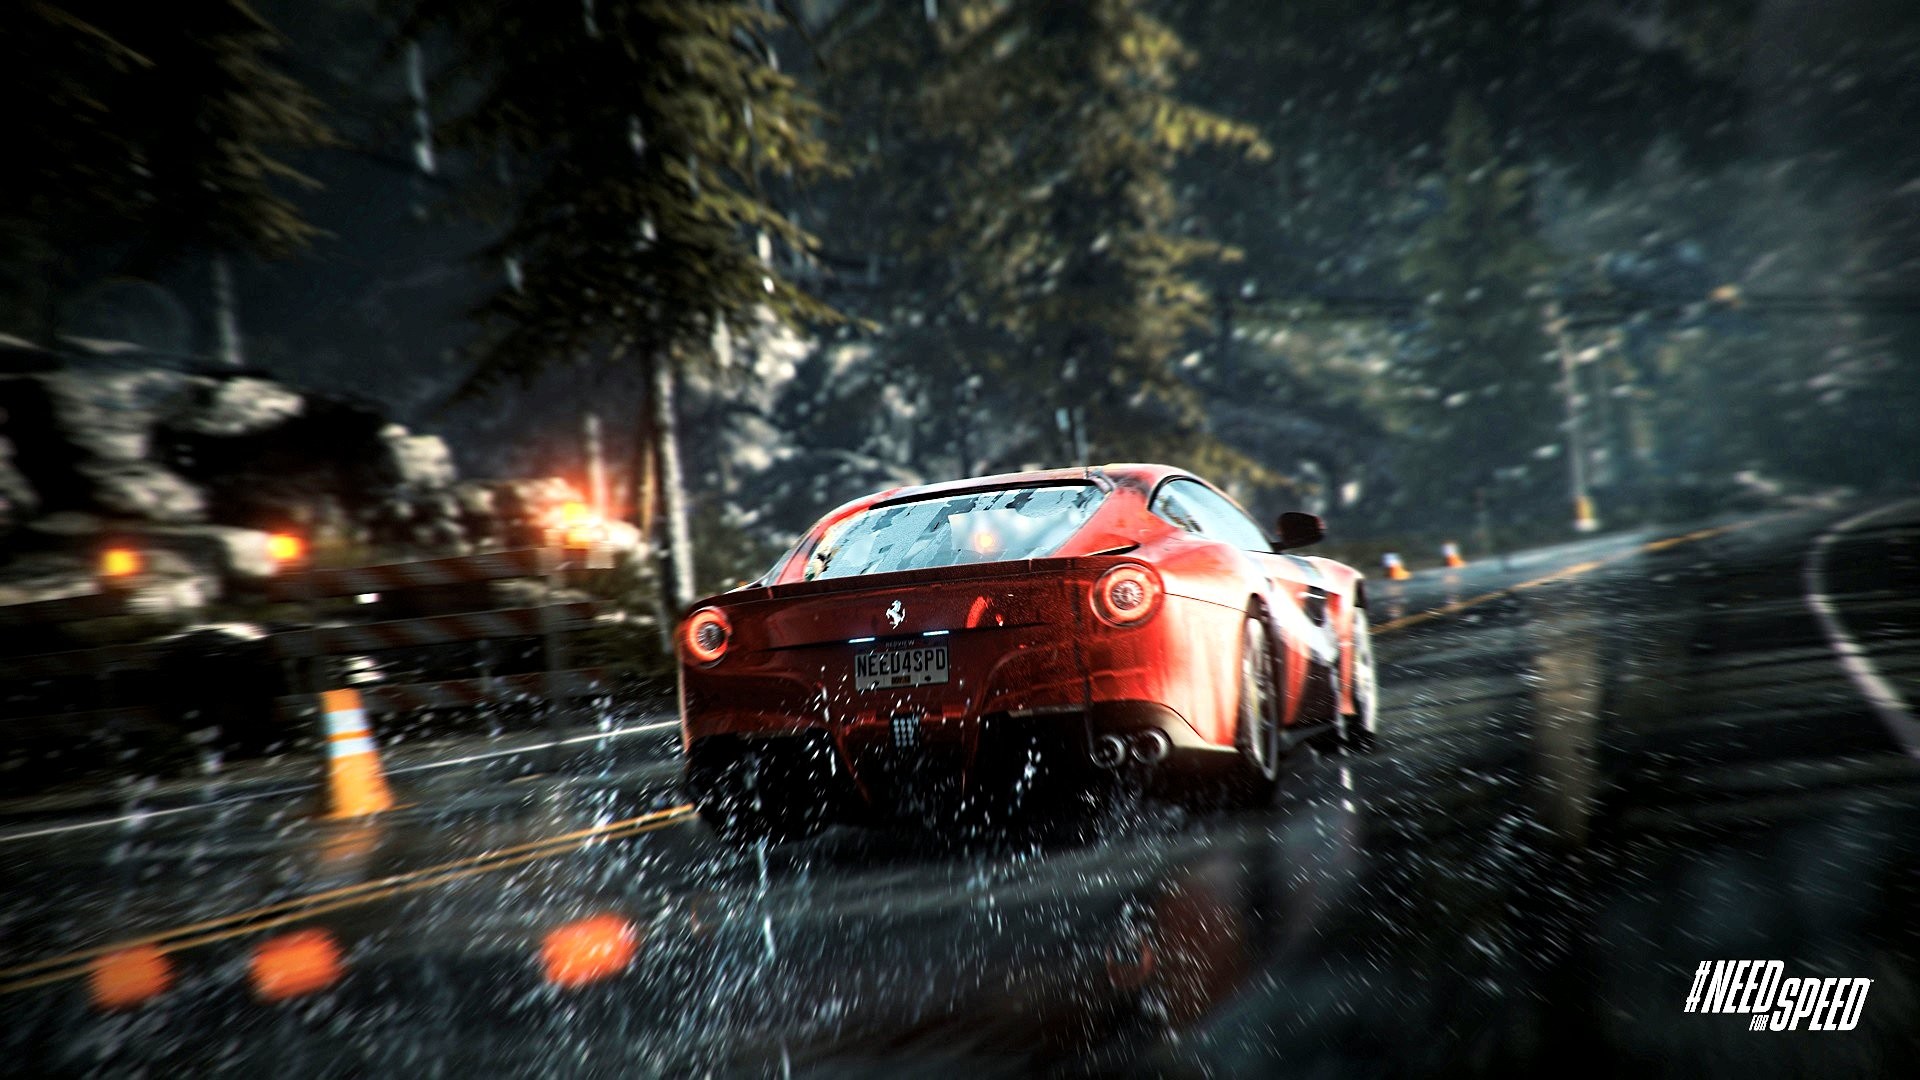 1920x1080 Fantastic Need For Speed Wallpaper